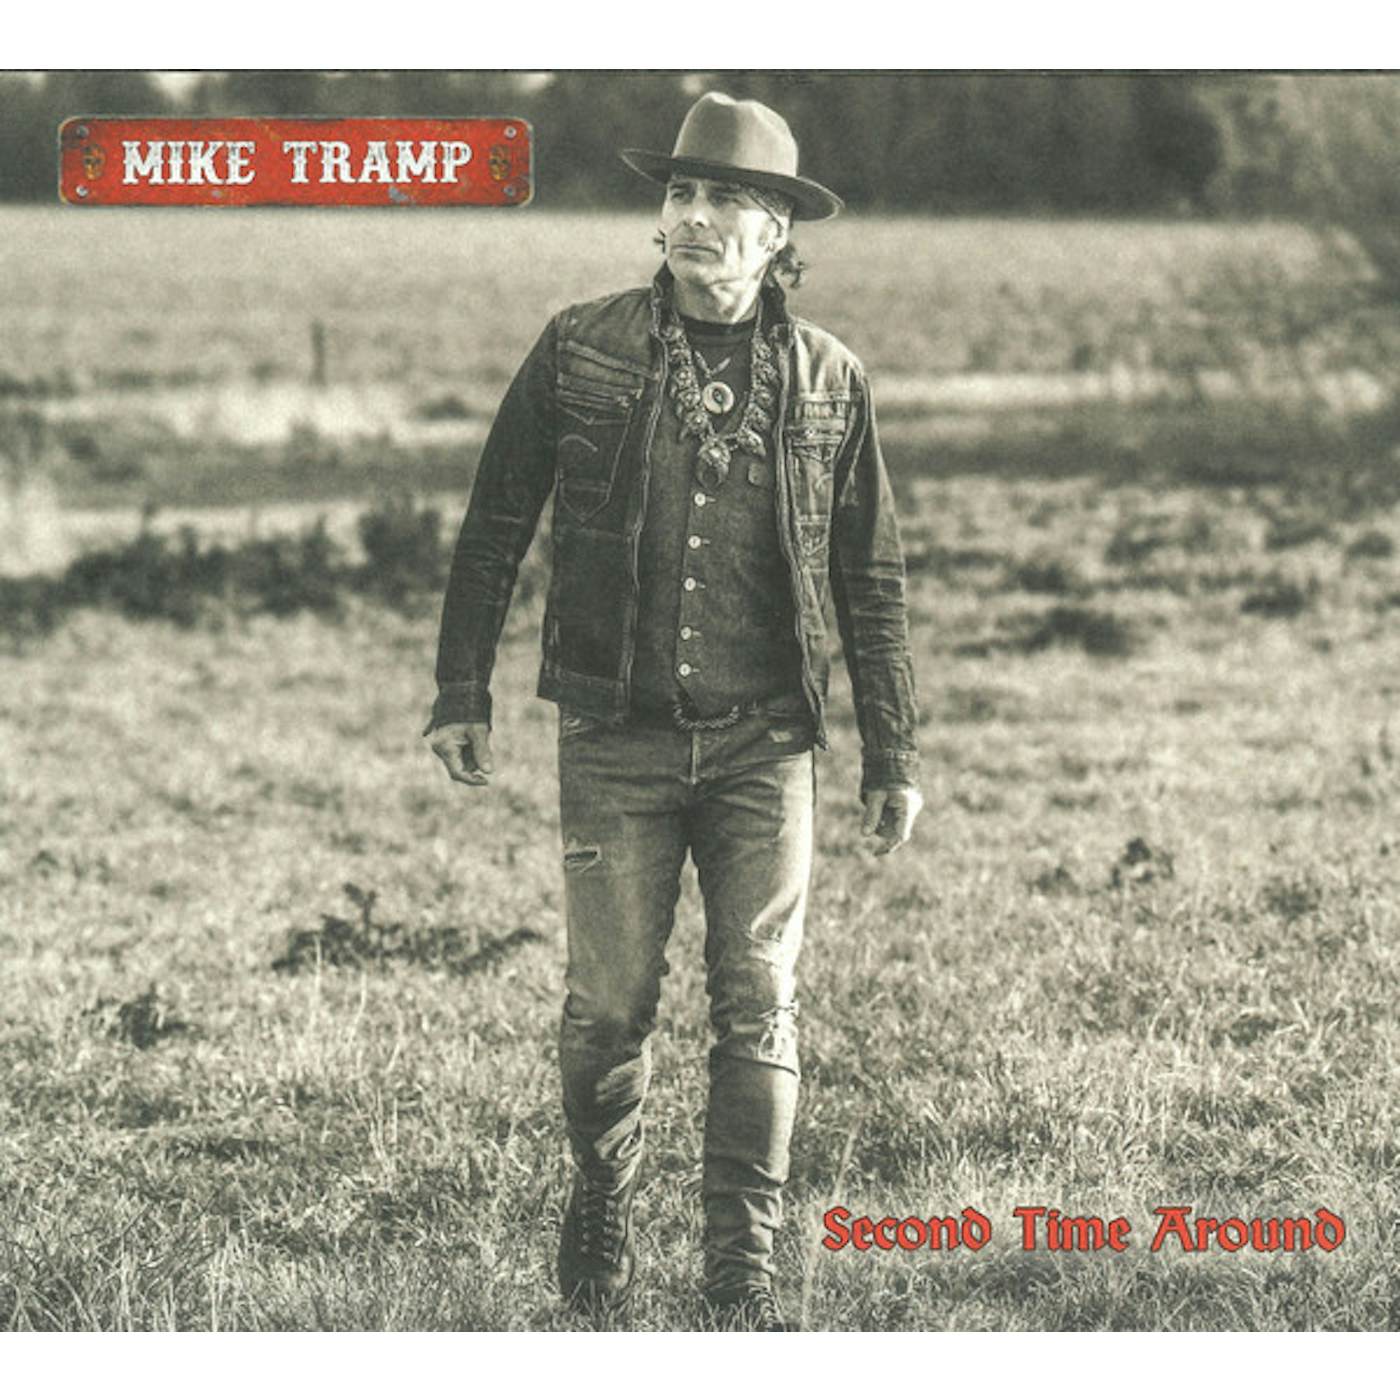 Mike Tramp Second Time Around Vinyl Record